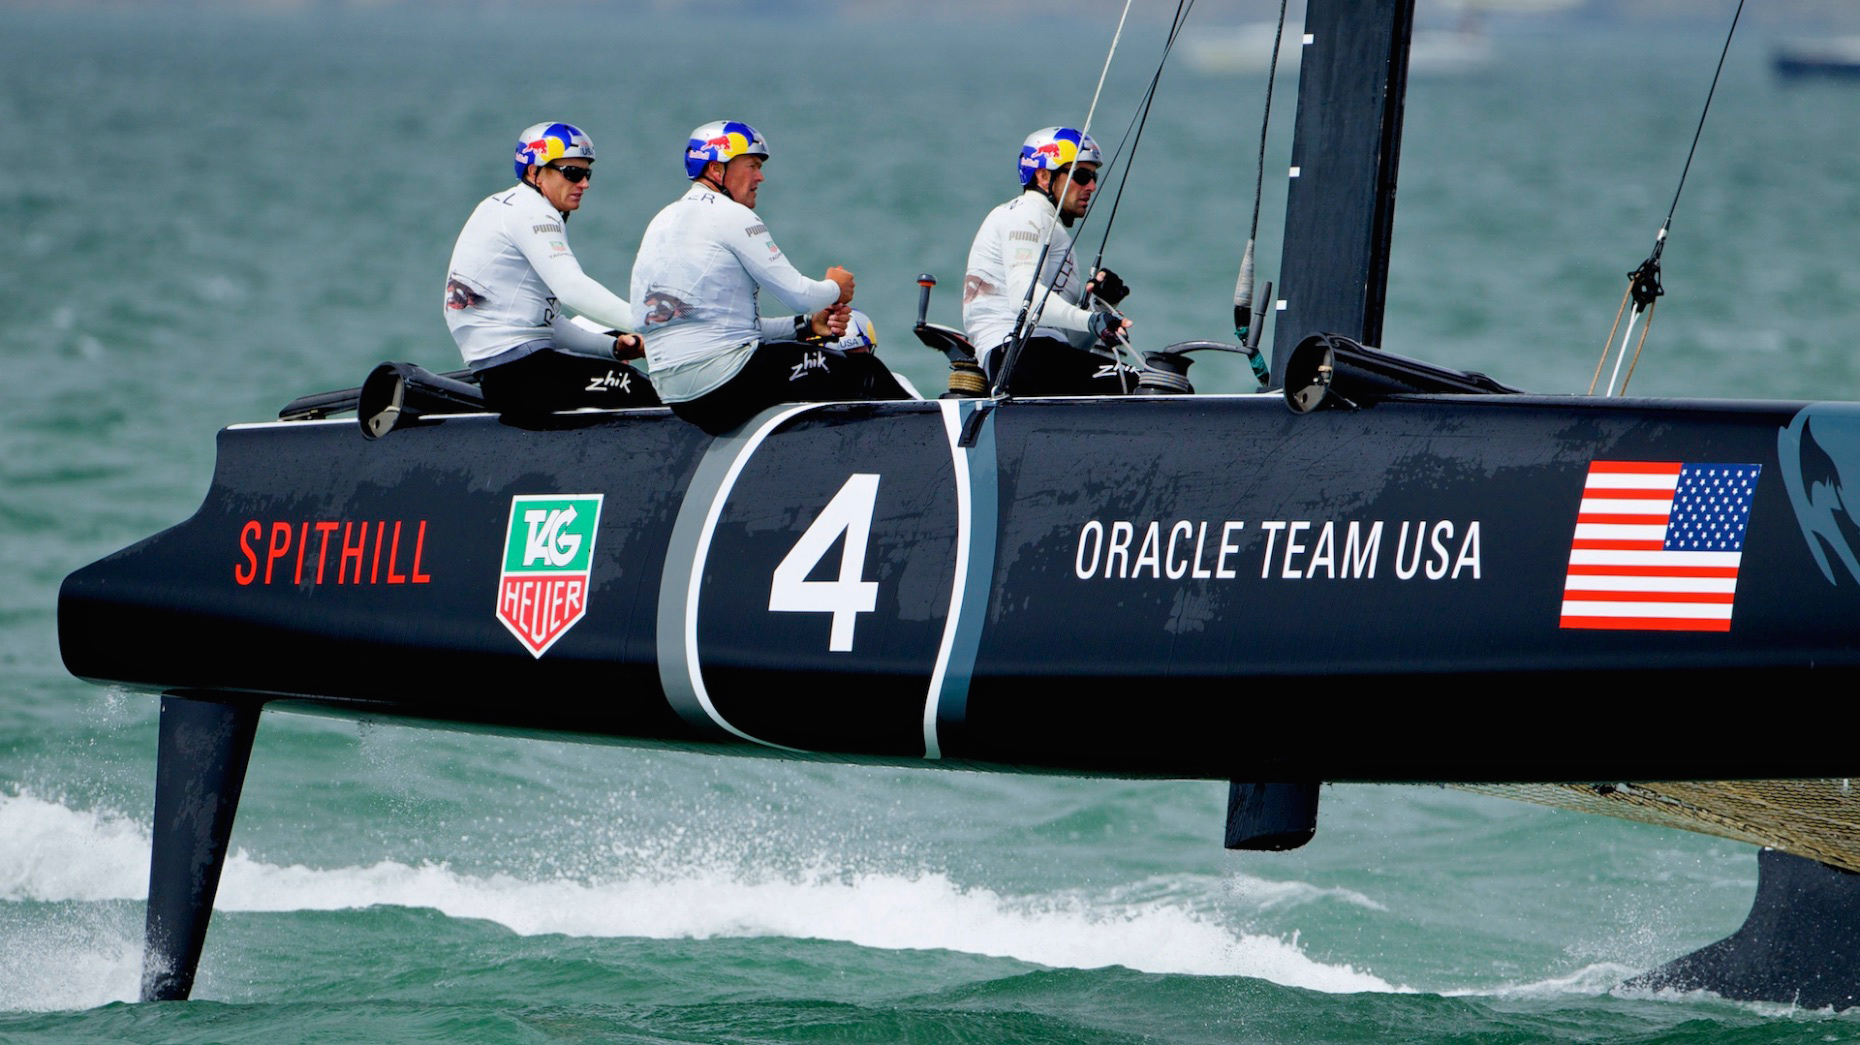 Jimmy Spithill, Oracle Team USA AC45, America